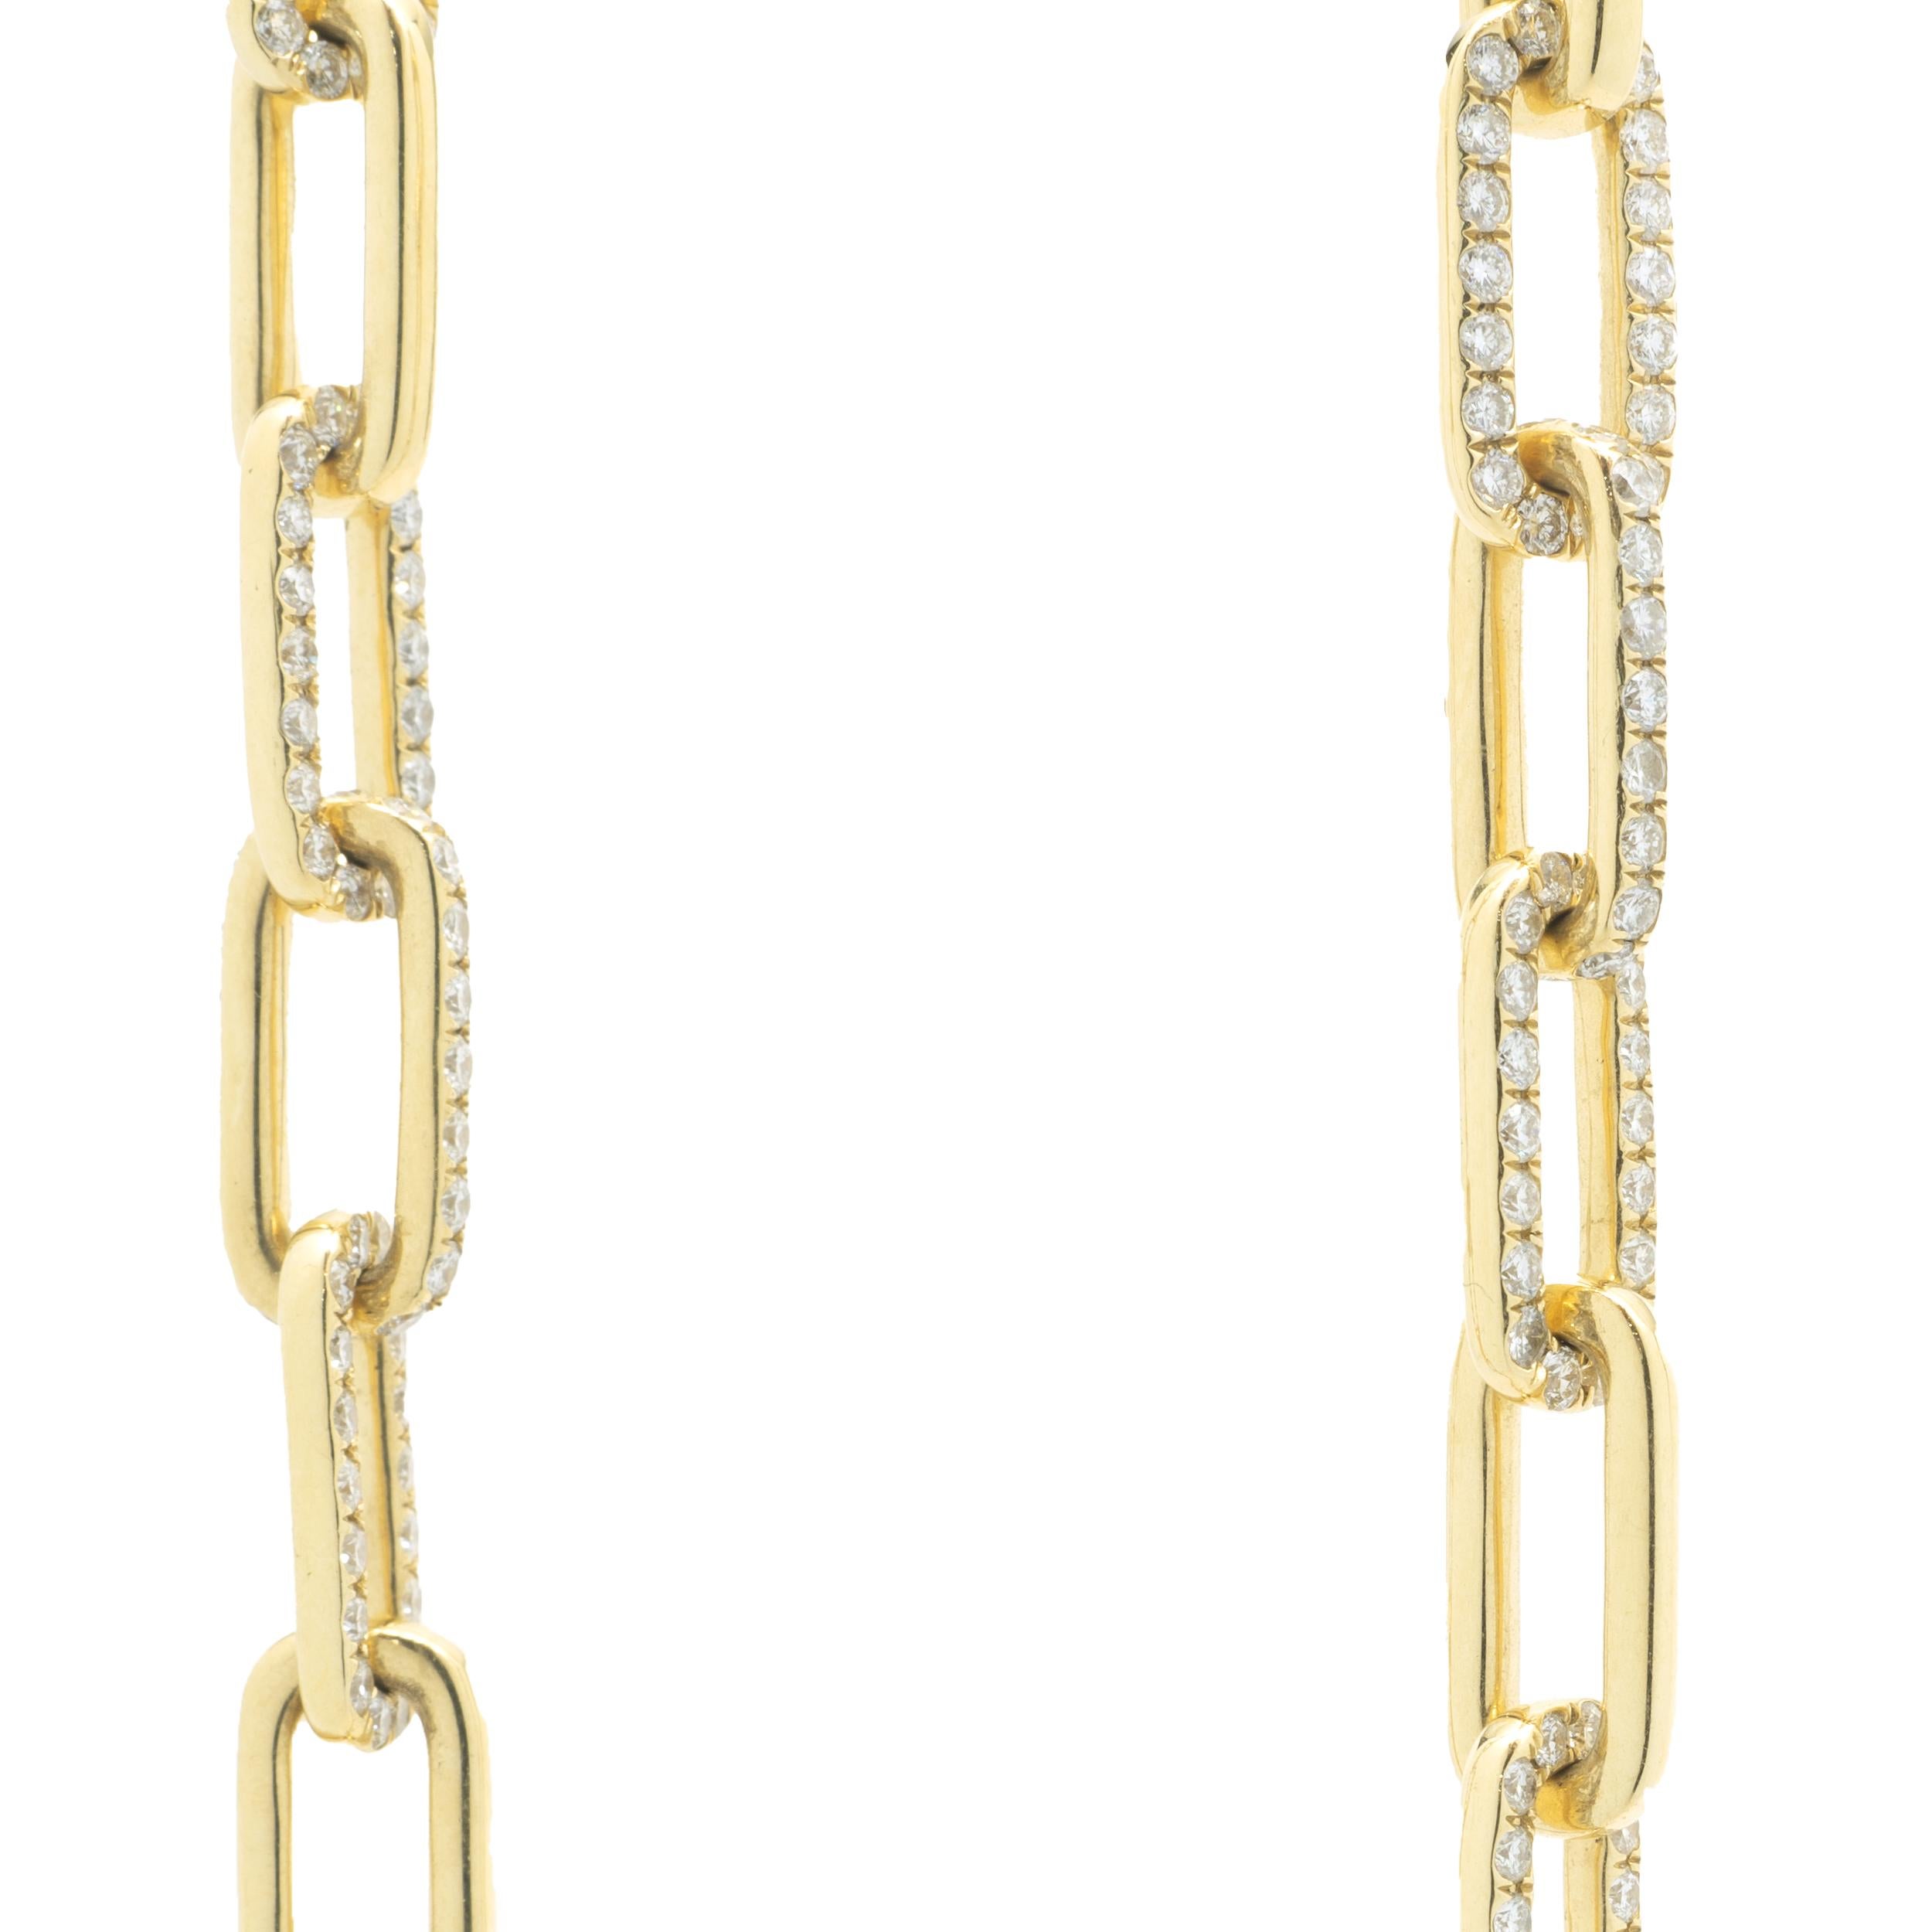 Designer: custom design
Material: 18K yellow gold
Diamonds: 336 round brilliant cut = 5.75cttw
Color: G
Clarity: VS2
Dimensions: necklace measures 24-inches in length 
Weight: 76.06 grams
